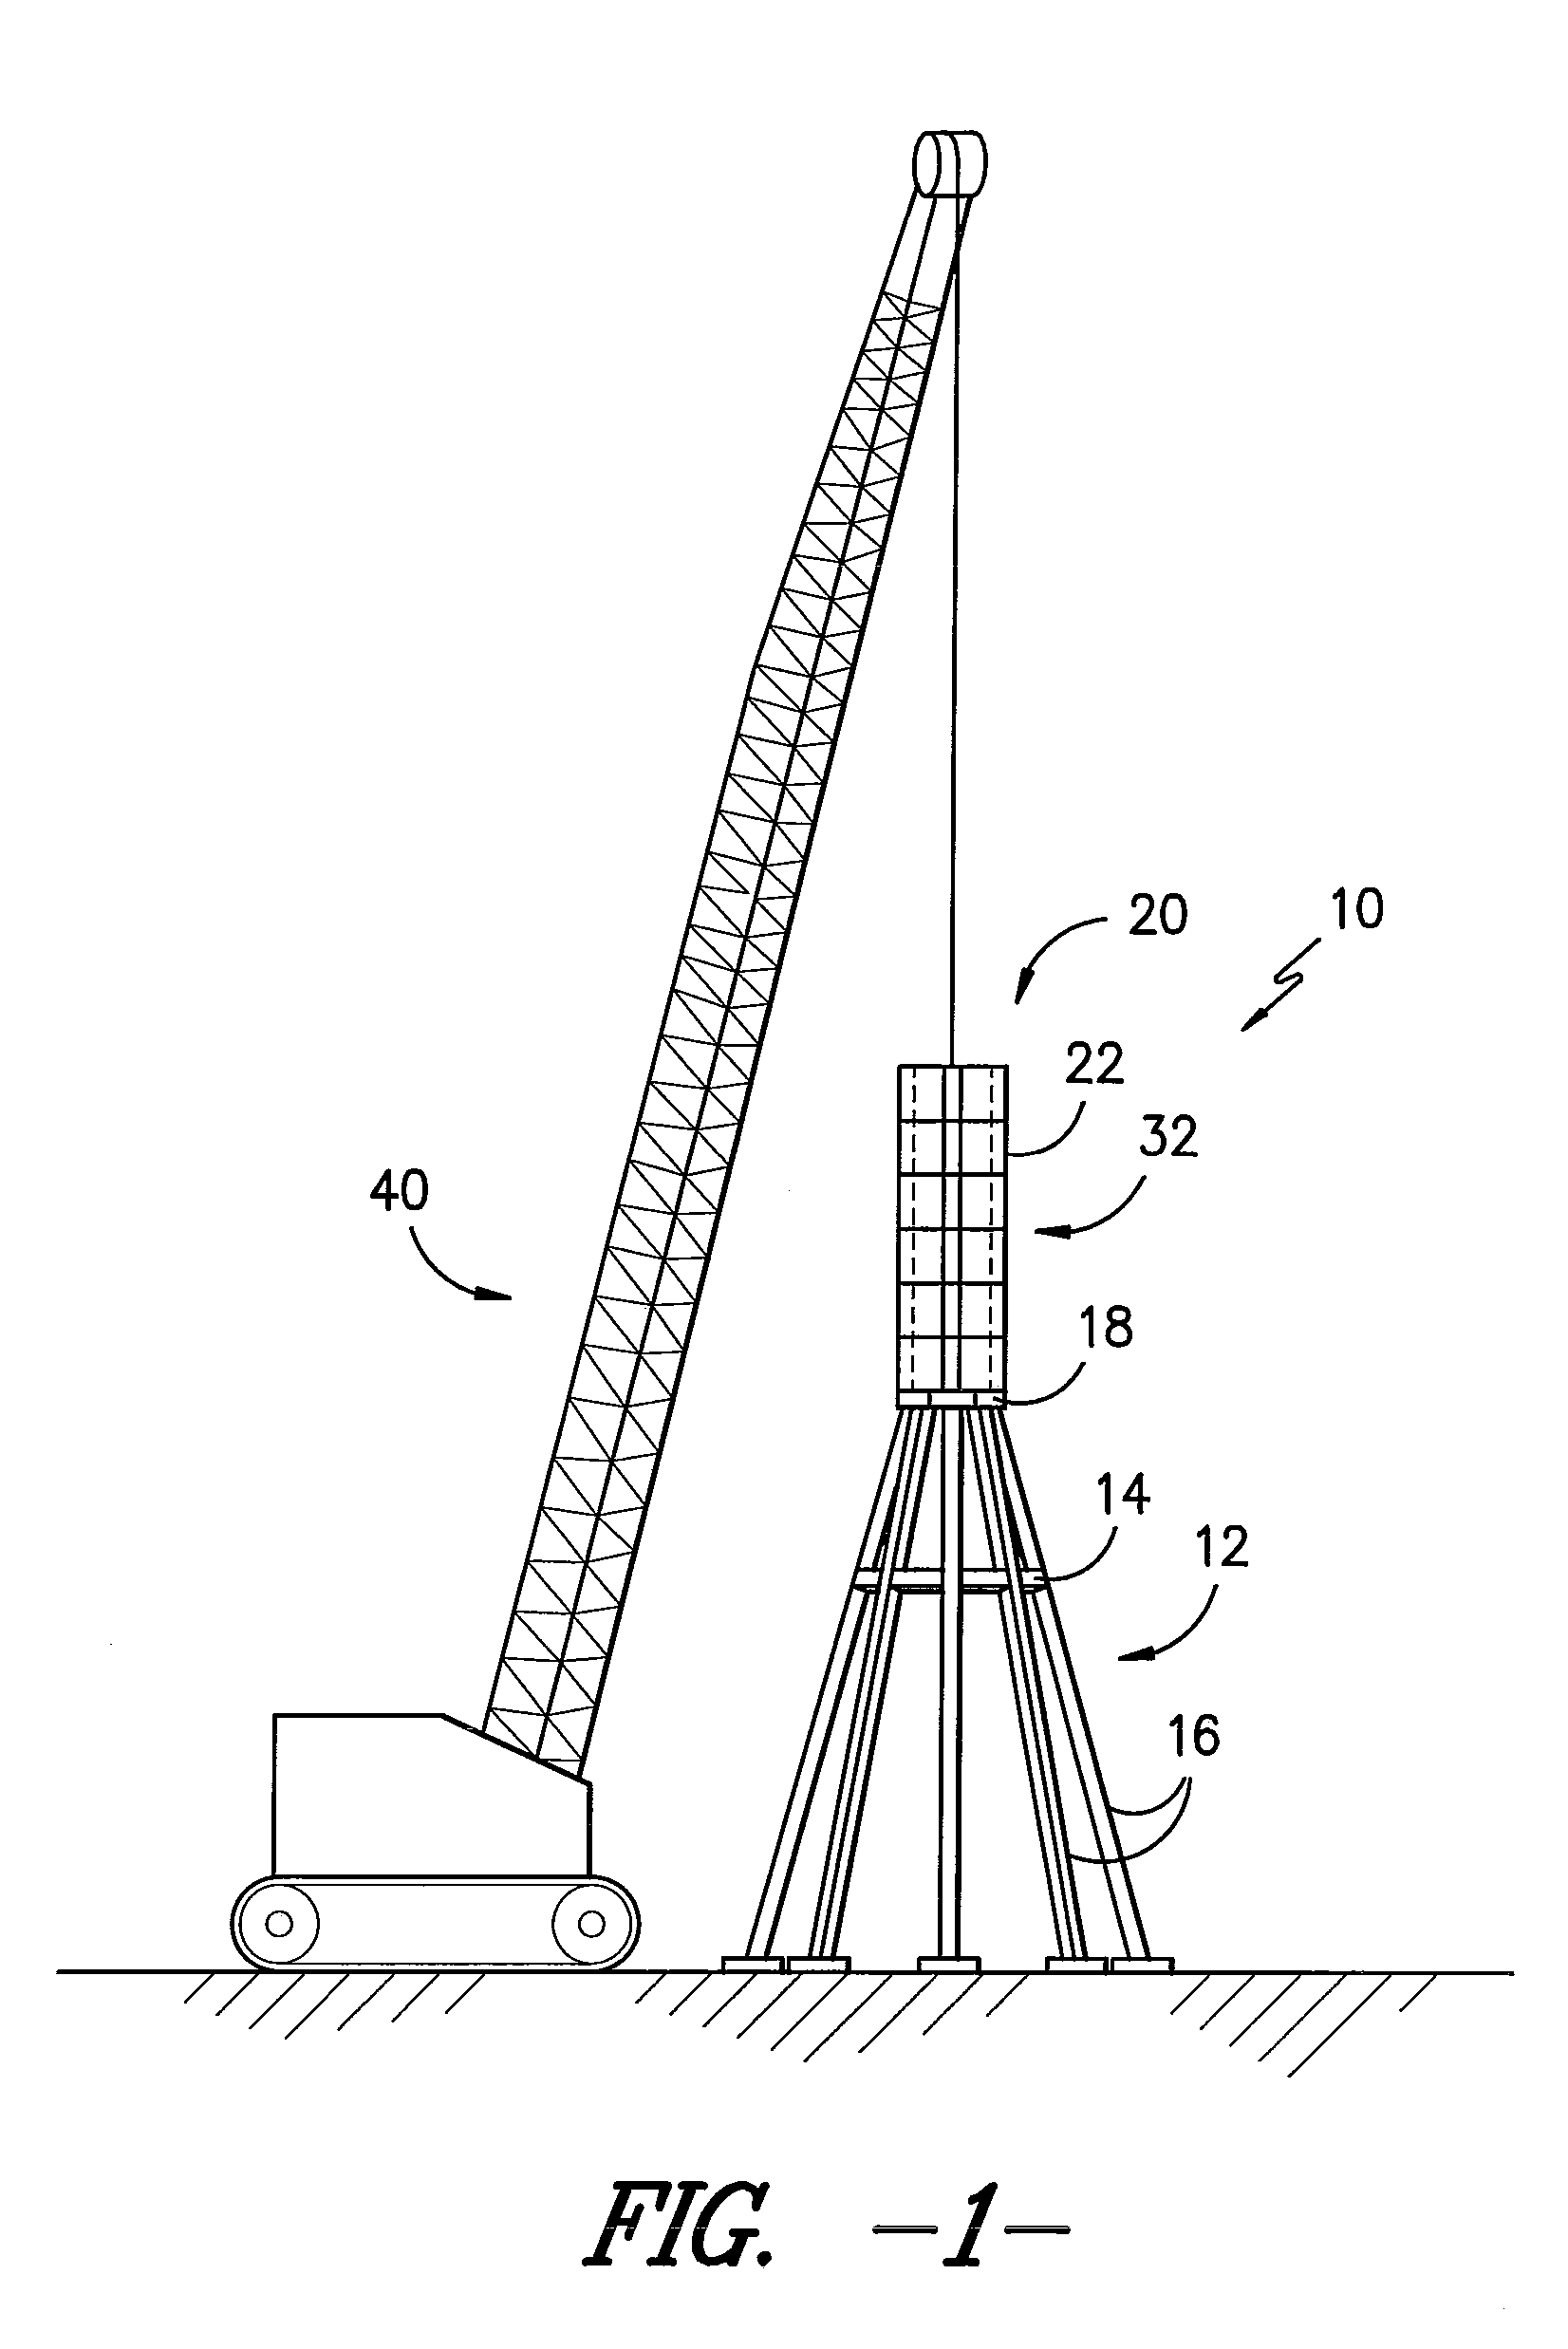 Tower erection system and method